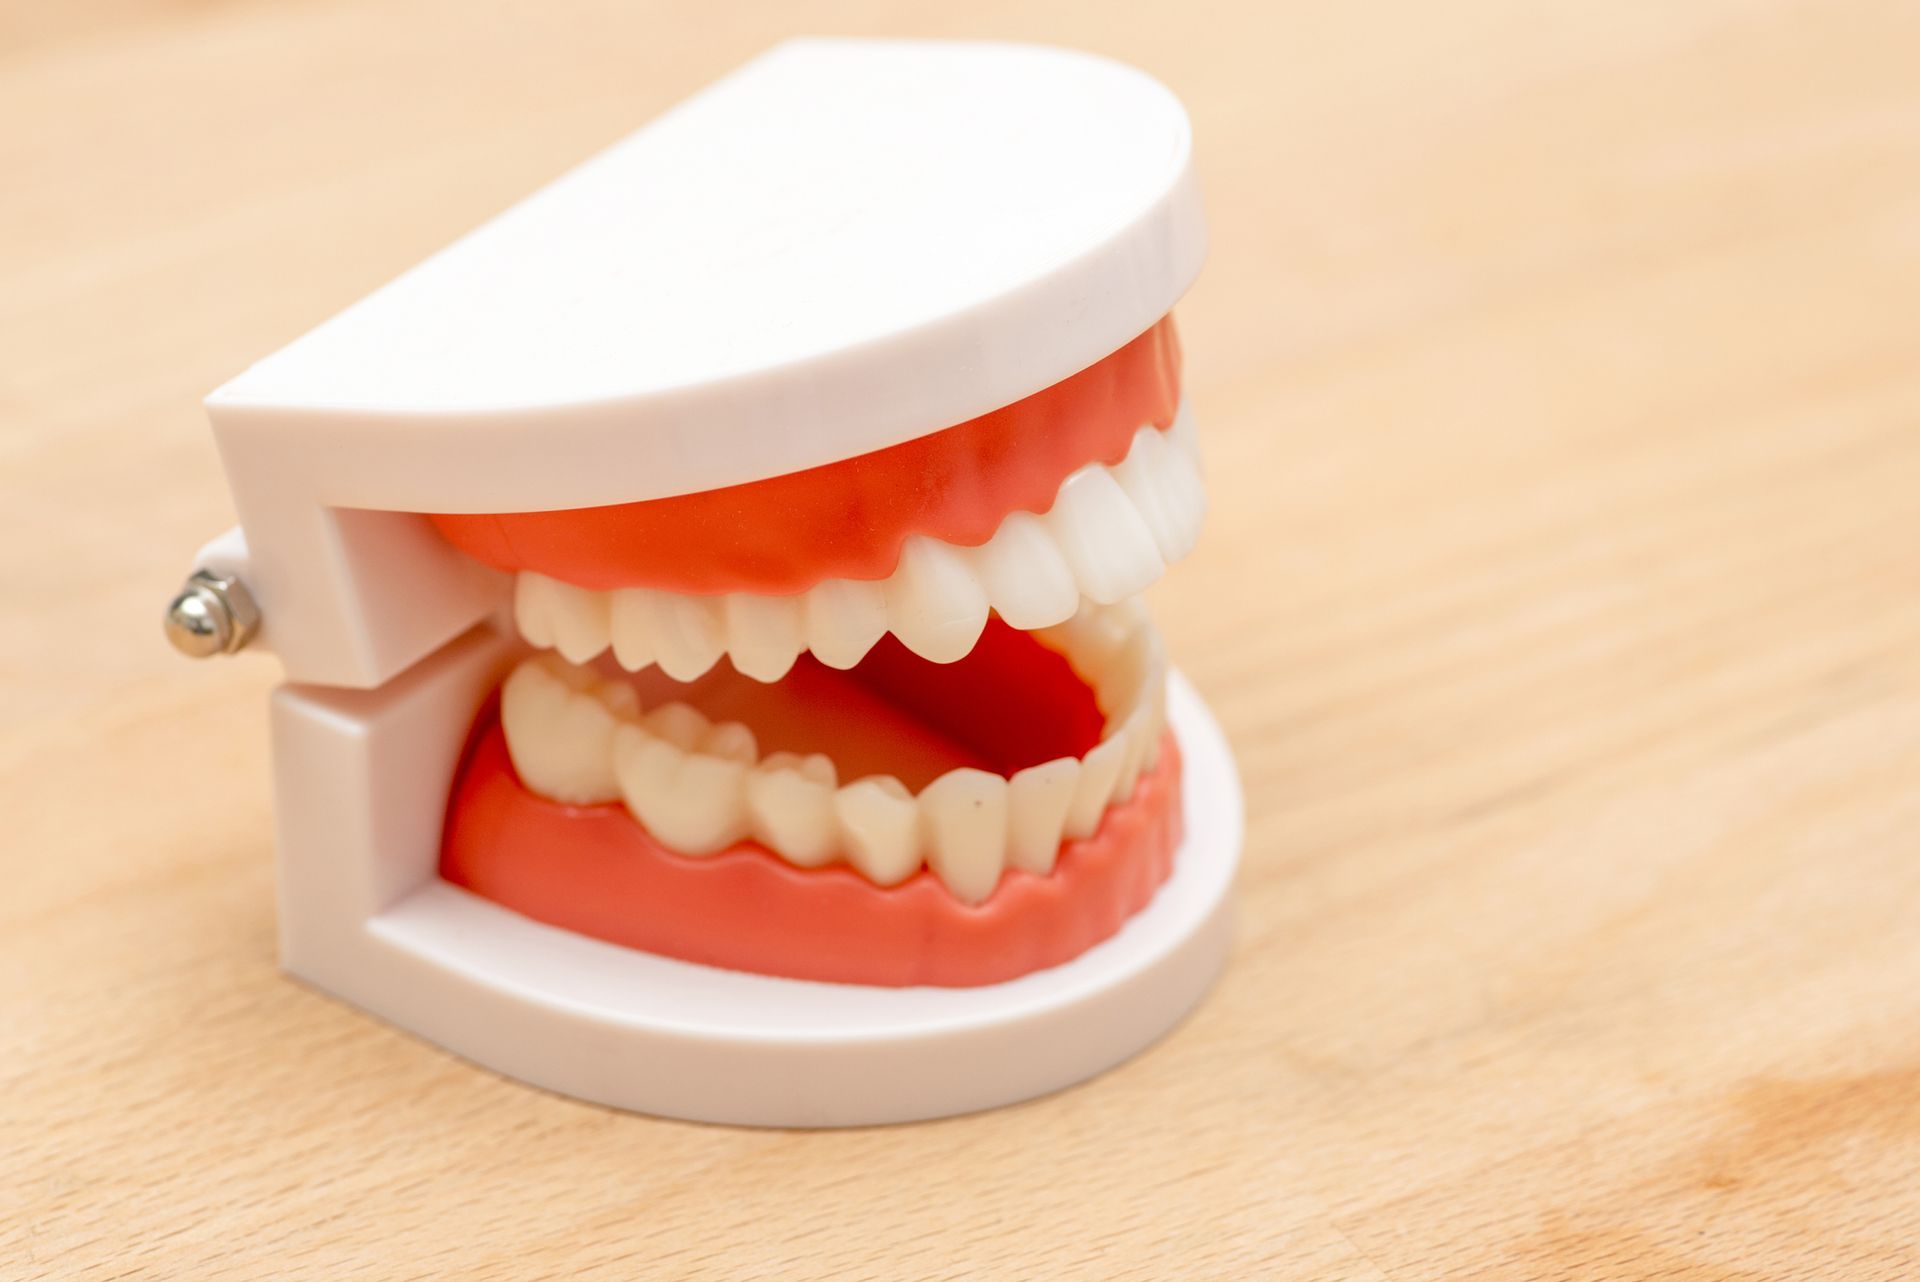 A model of teeth is sitting on a wooden table.